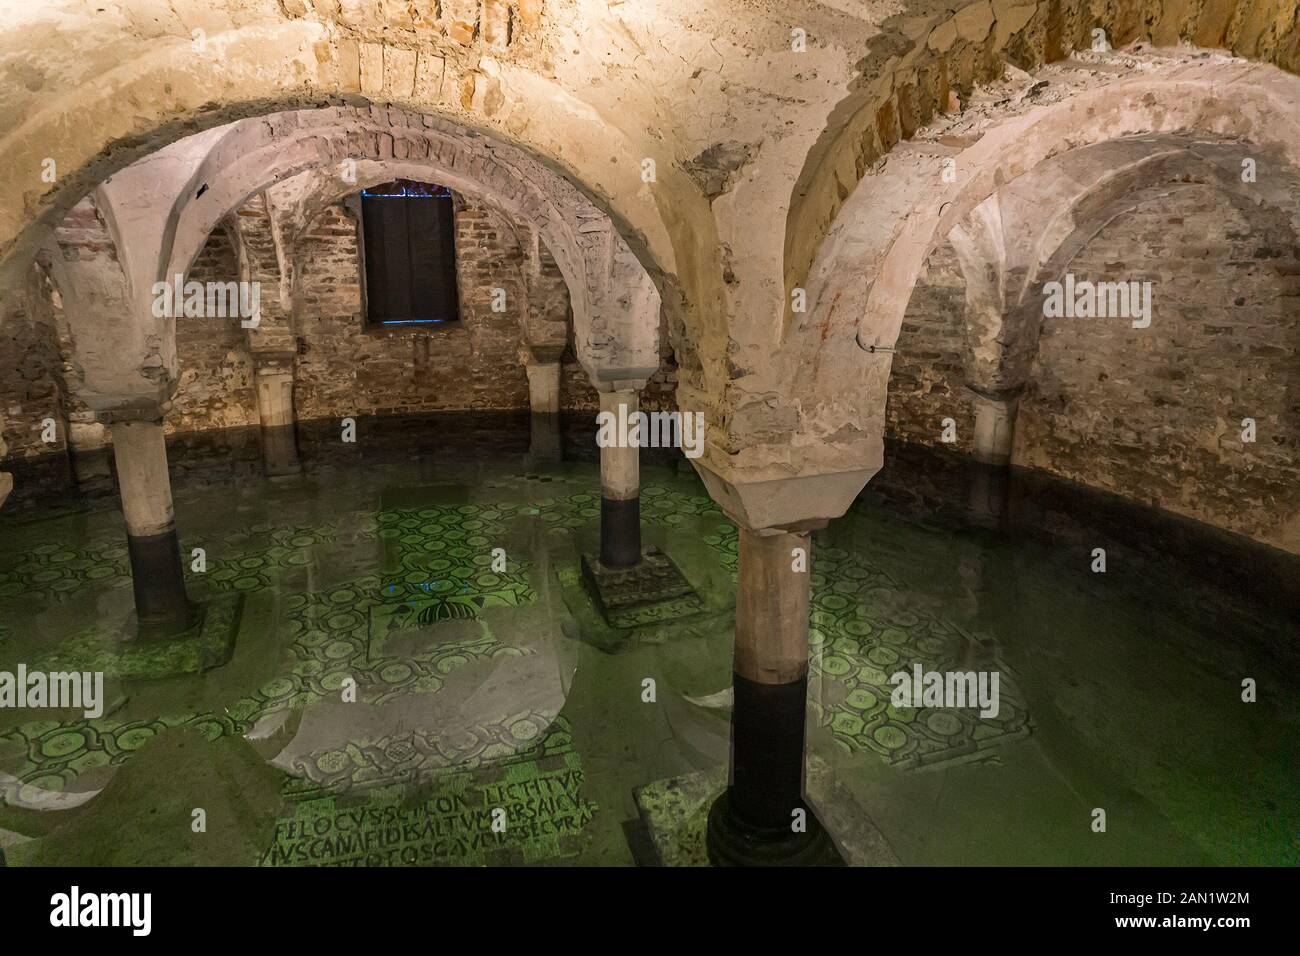 RAVENNA, ITALY - FEBRUARY 16, 2018: Crypt under water in Basilica of San Francesco at Ravenna, Italy. It is irst build in 450 and it is a major church Stock Photo